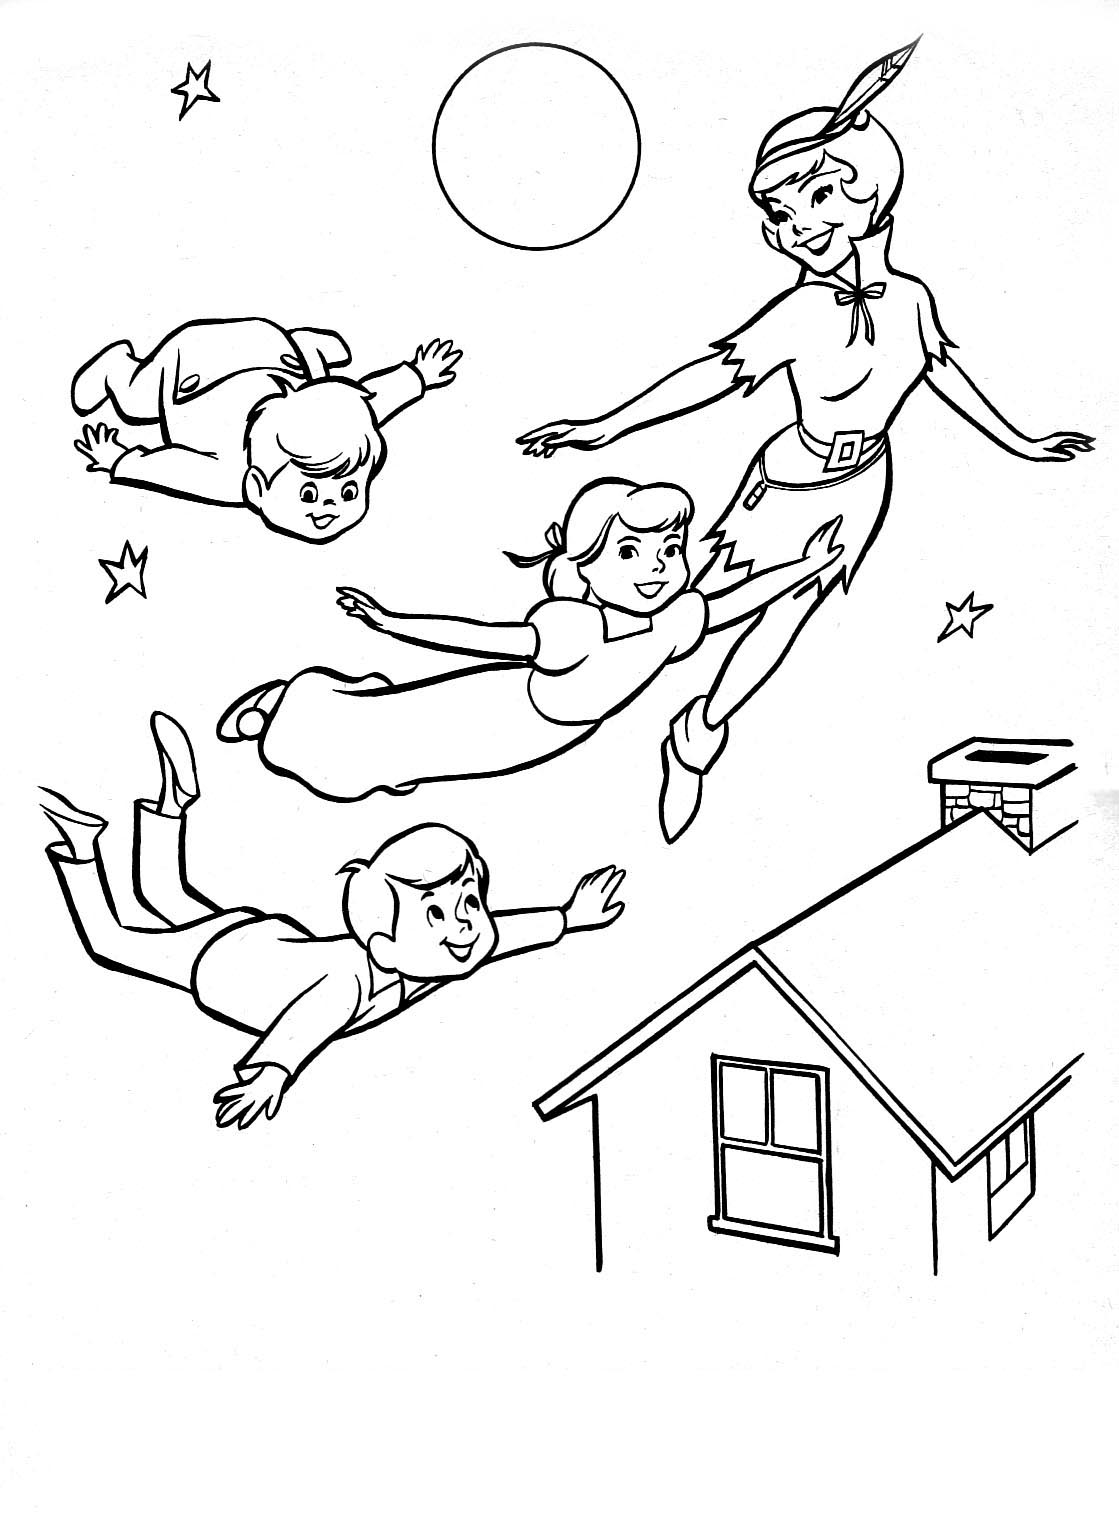 peter-pan-to-print-for-free-peter-pan-kids-coloring-pages